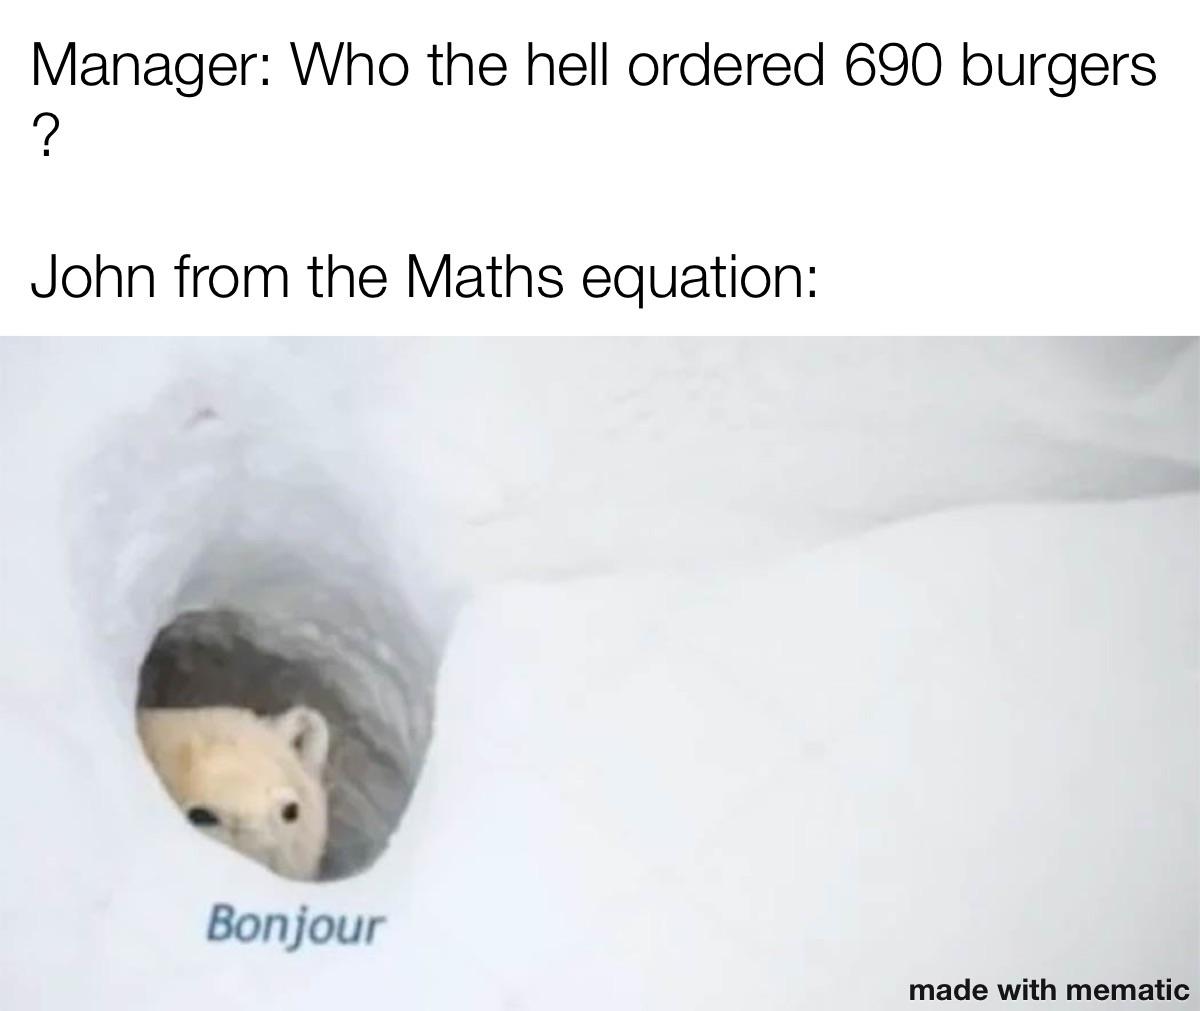 polar bear - Manager Who the hell ordered 690 burgers ? John from the Maths equation Bonjour made with mematic